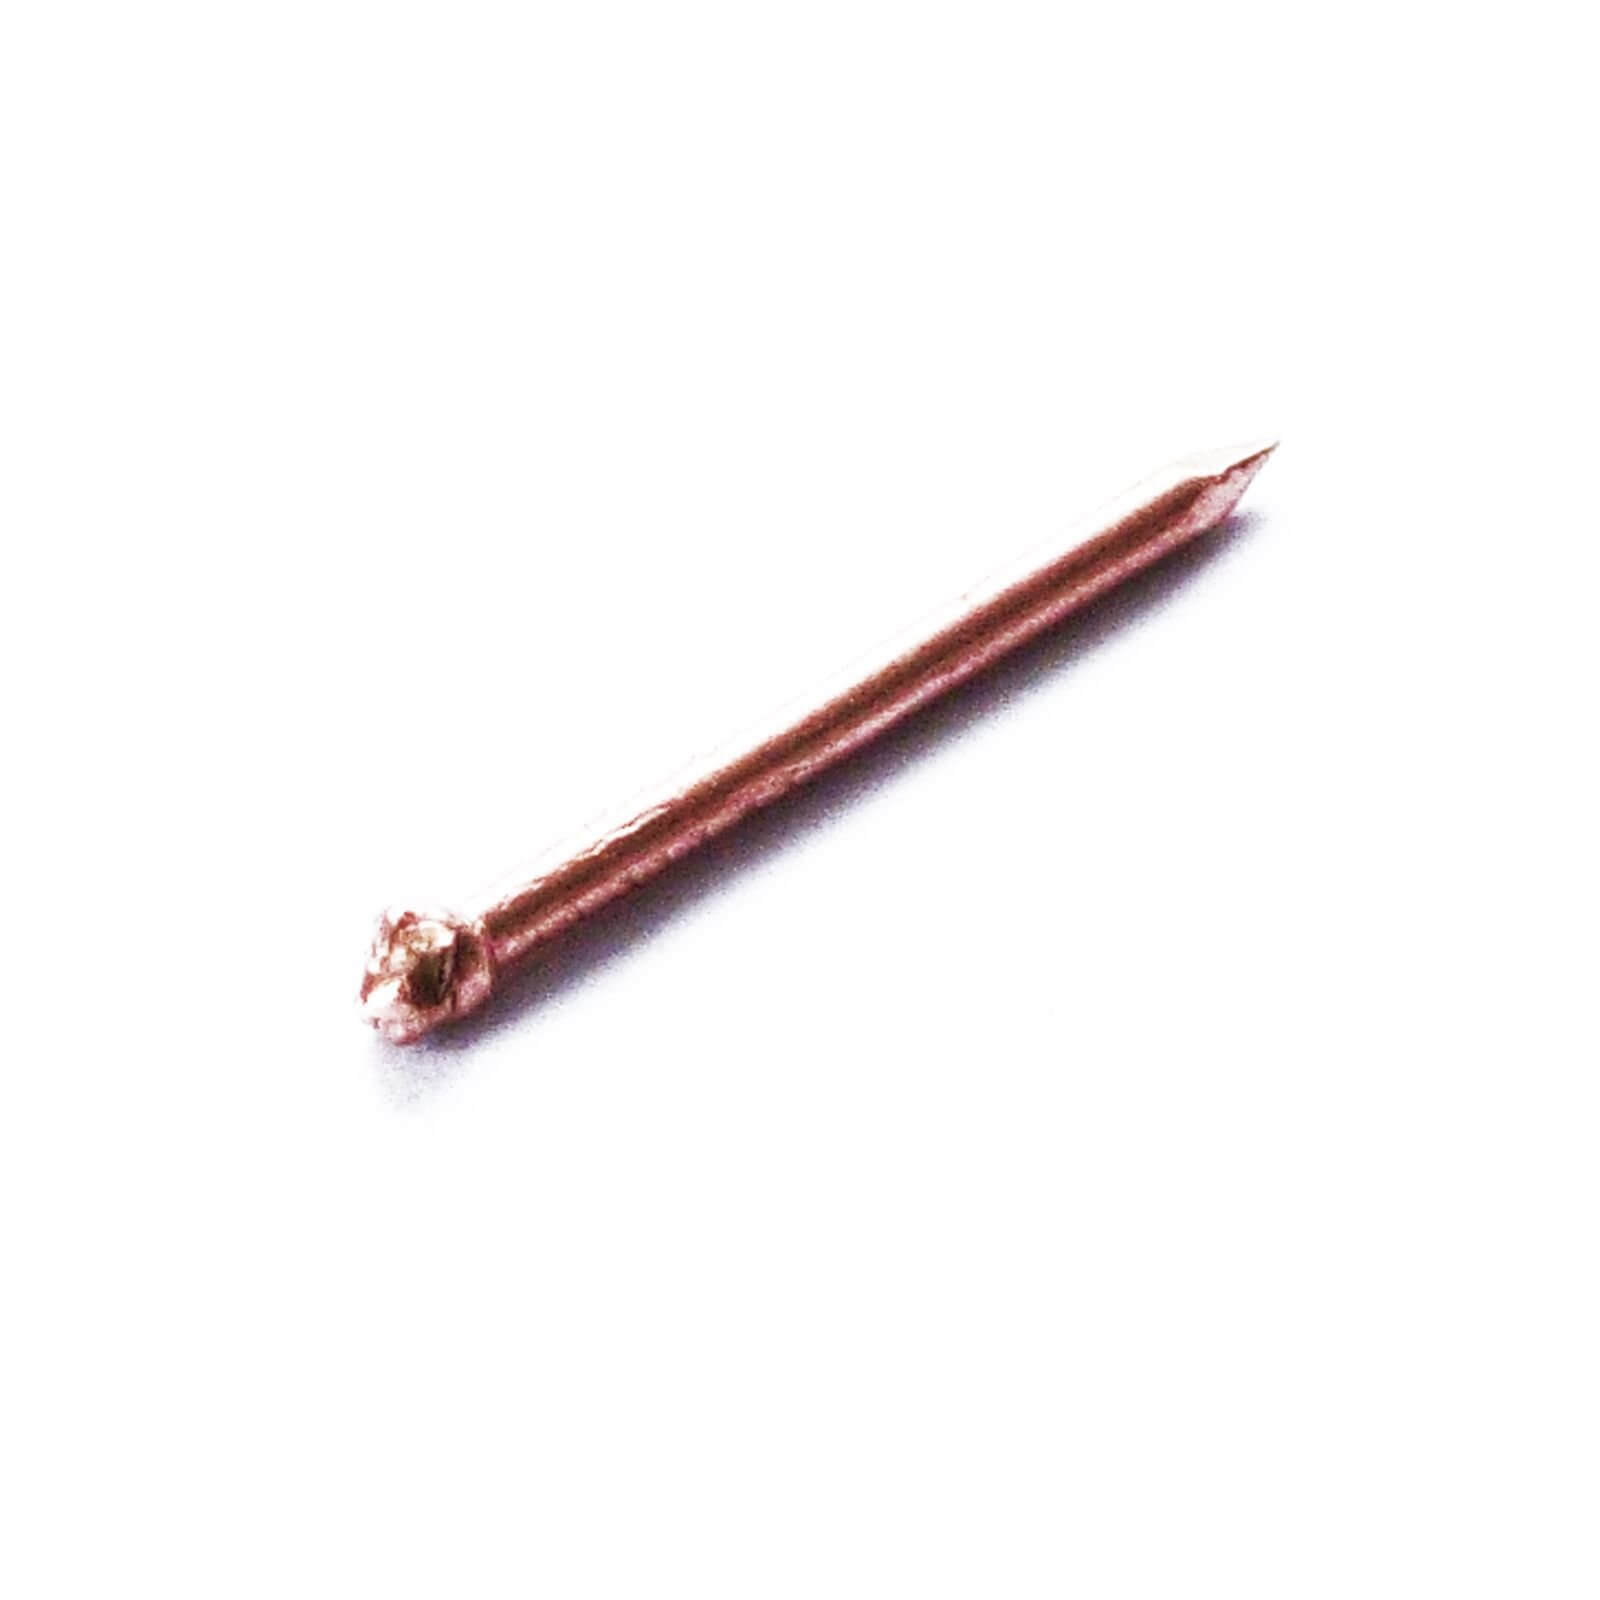 Hardboard Pins - 20mm Copper Plated - 100g